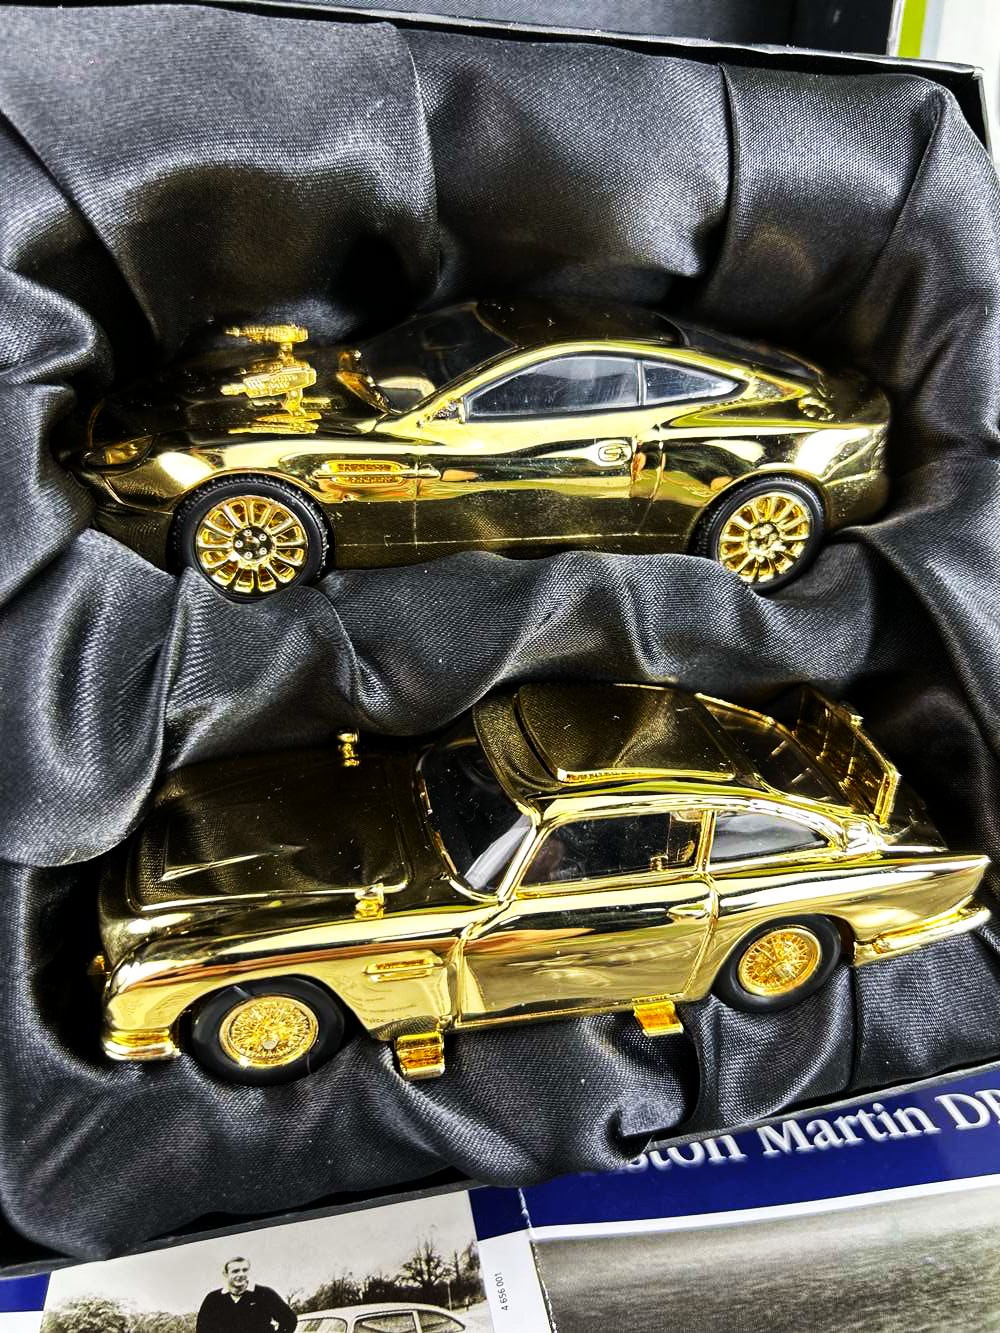 James Bond 007 Special Edition 40th Anniversary Gold Aston Martin`s - Image 4 of 7